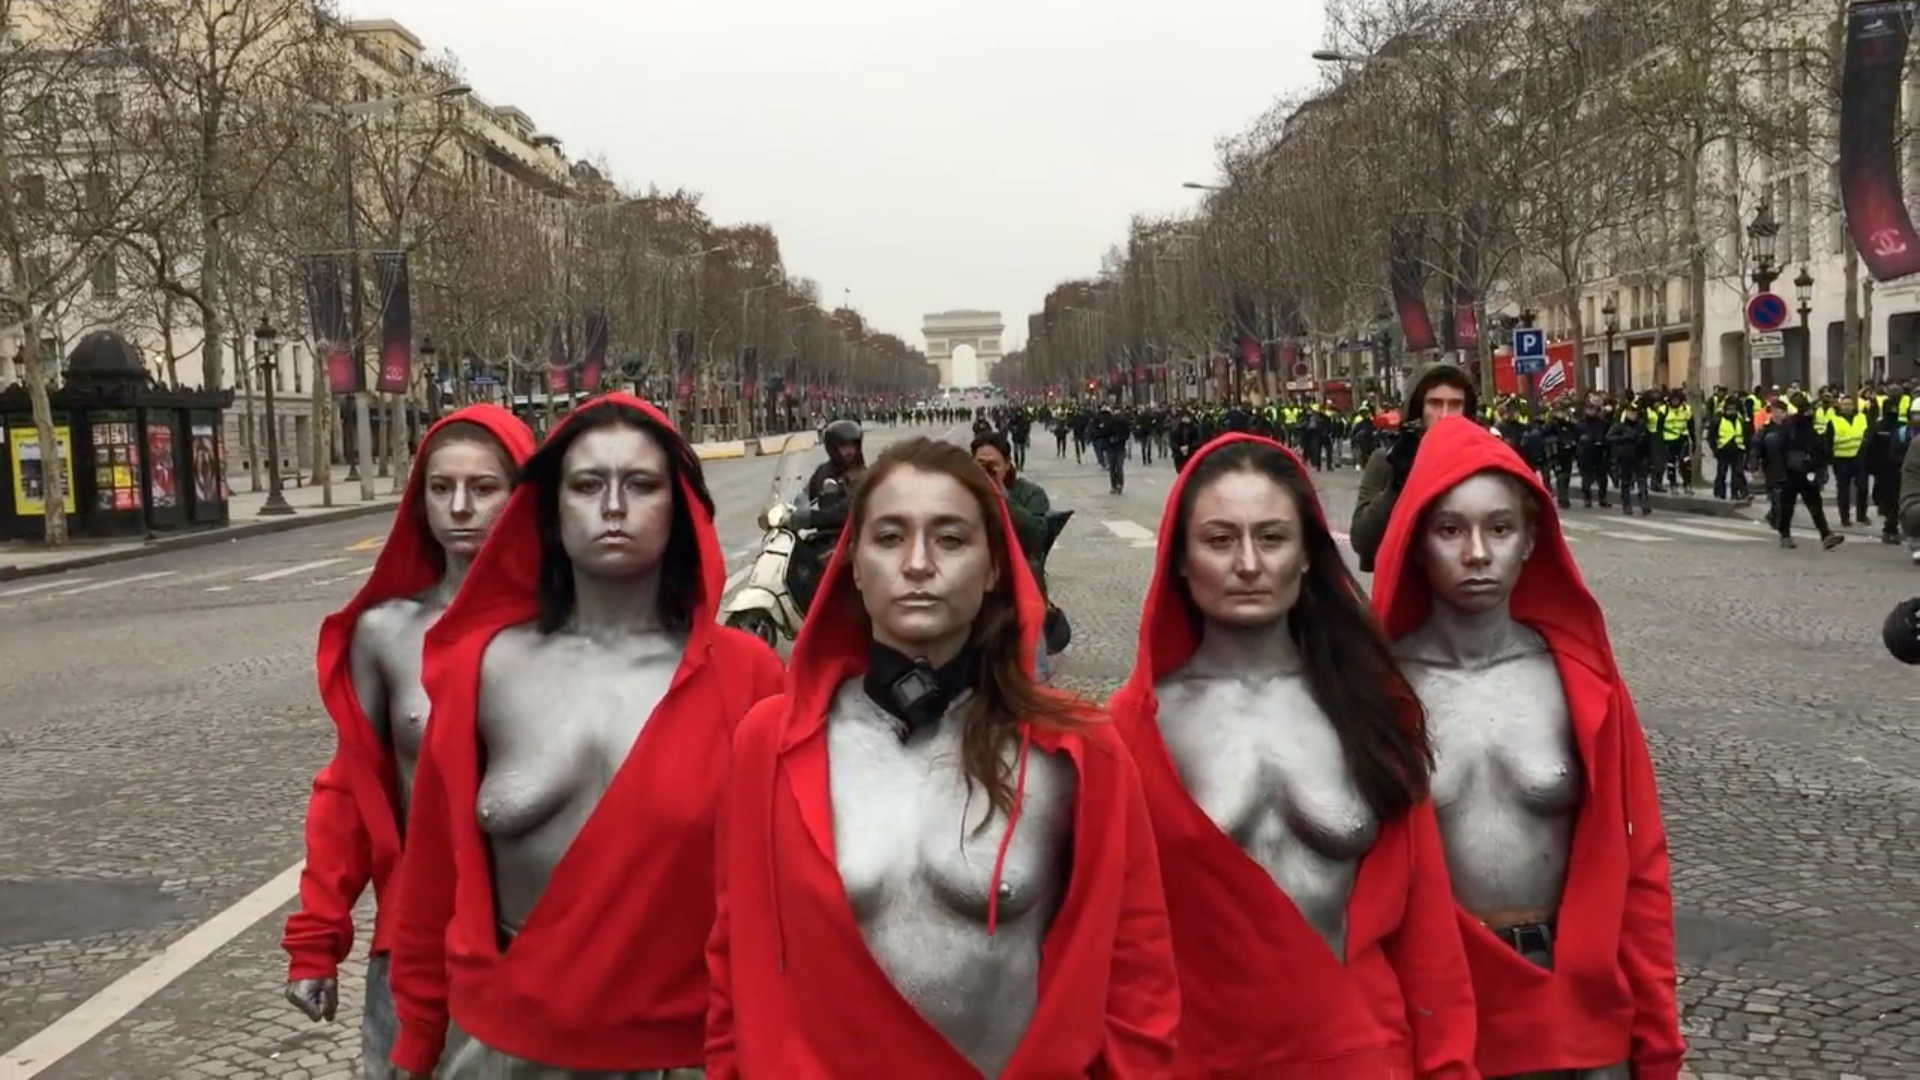 Nudist Fisting - Mother of Marianne. Meet Deborah De Robertis, the creator of the powerful  symbol of modern feminist France | by Andrew Andronicou | Medium